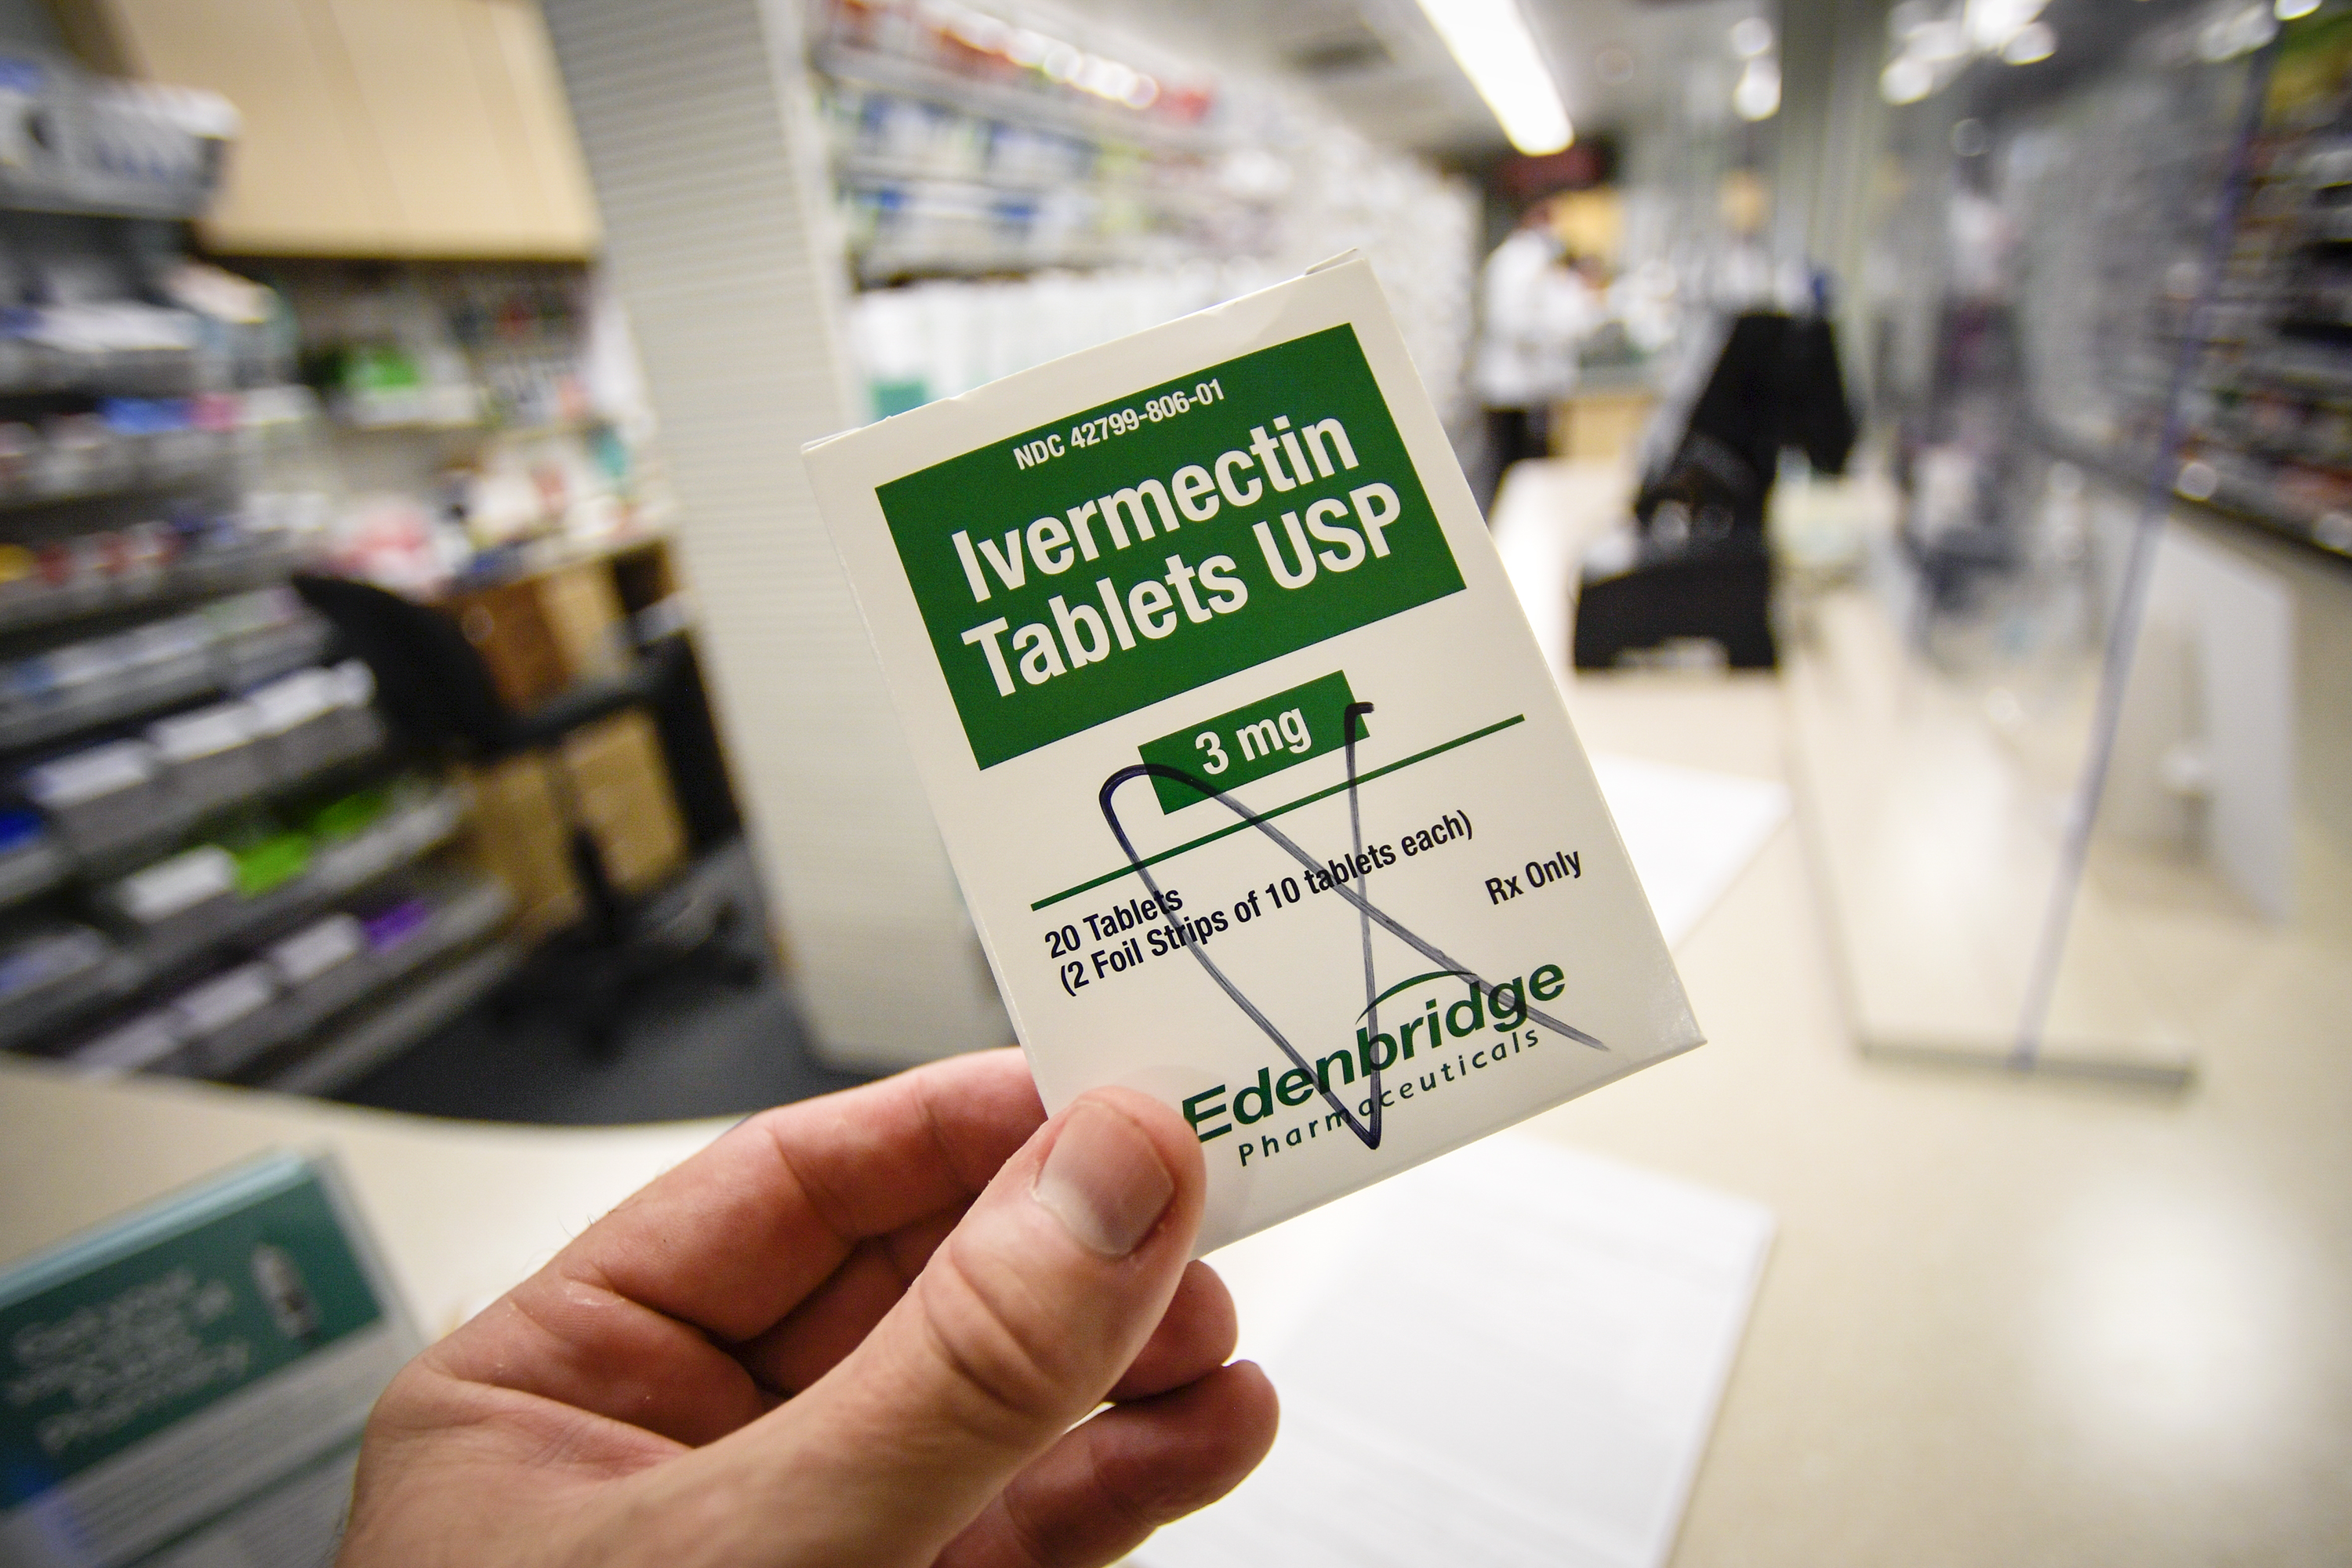 A hand holding a small packet labeled Ivermectin Tablets USP. In the background is the aisle of a drugstore.